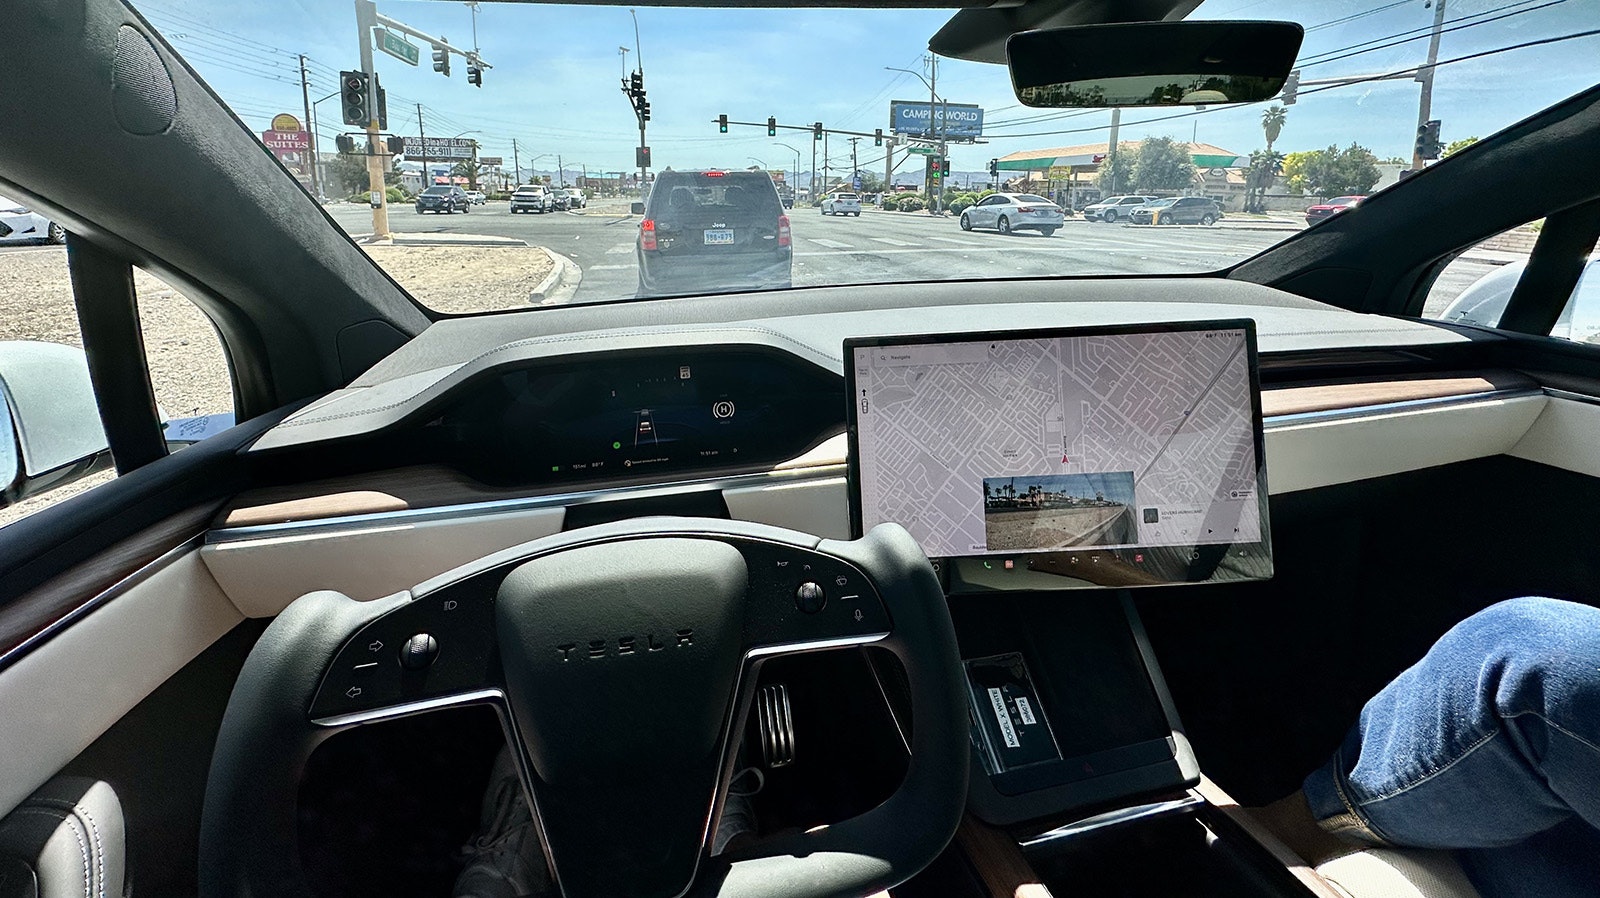 The cockpit during Bill Sniffin's Las Vegas test drive of a $133,000 Tesla.